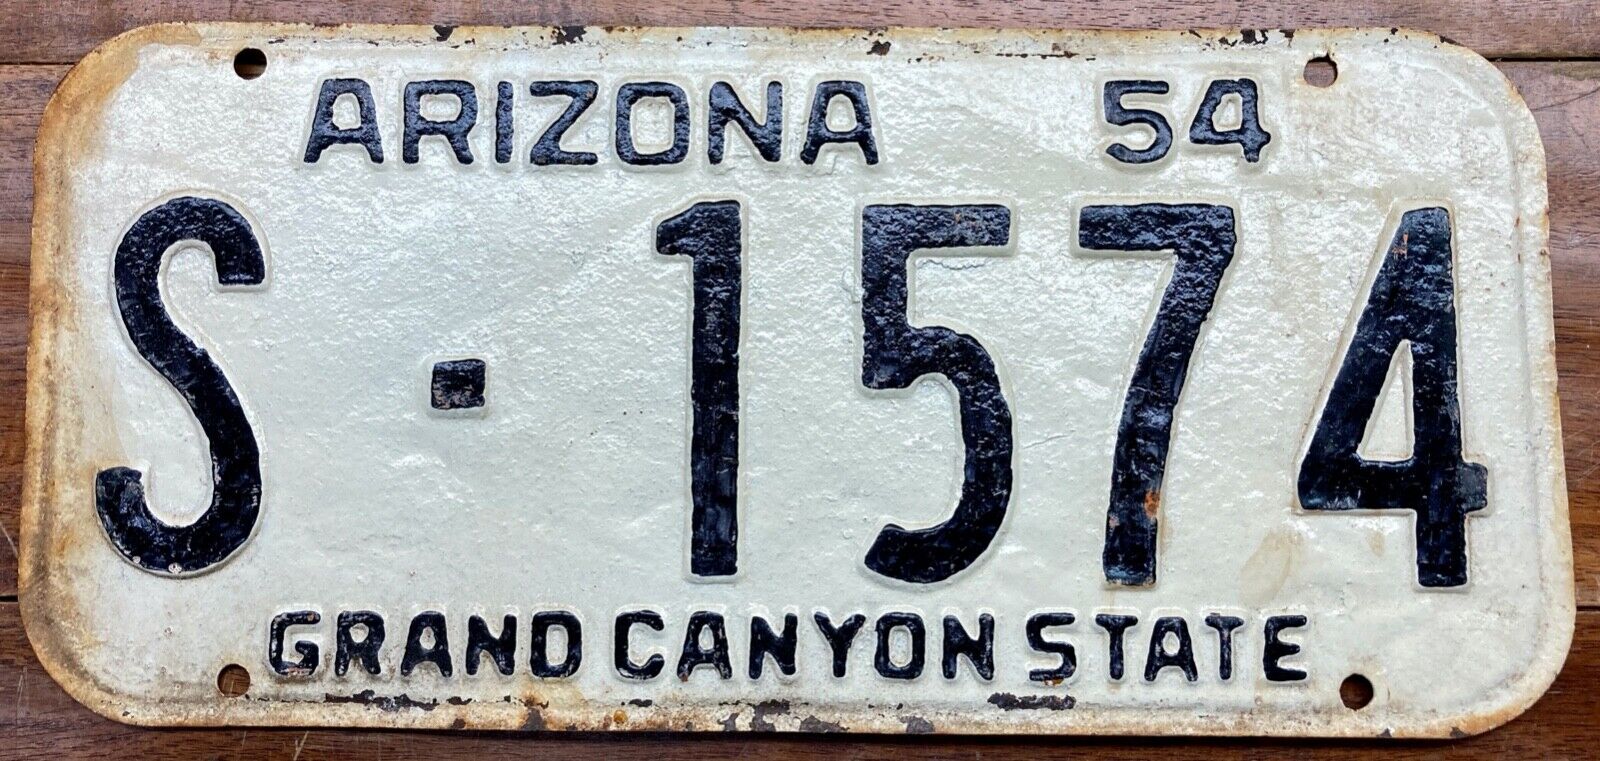 SOLID RUSTIC 1954 1955 GRAHAM COUNTY, ARIZONA LICENSE PLATE S 1574 NOT MVD CLEAR